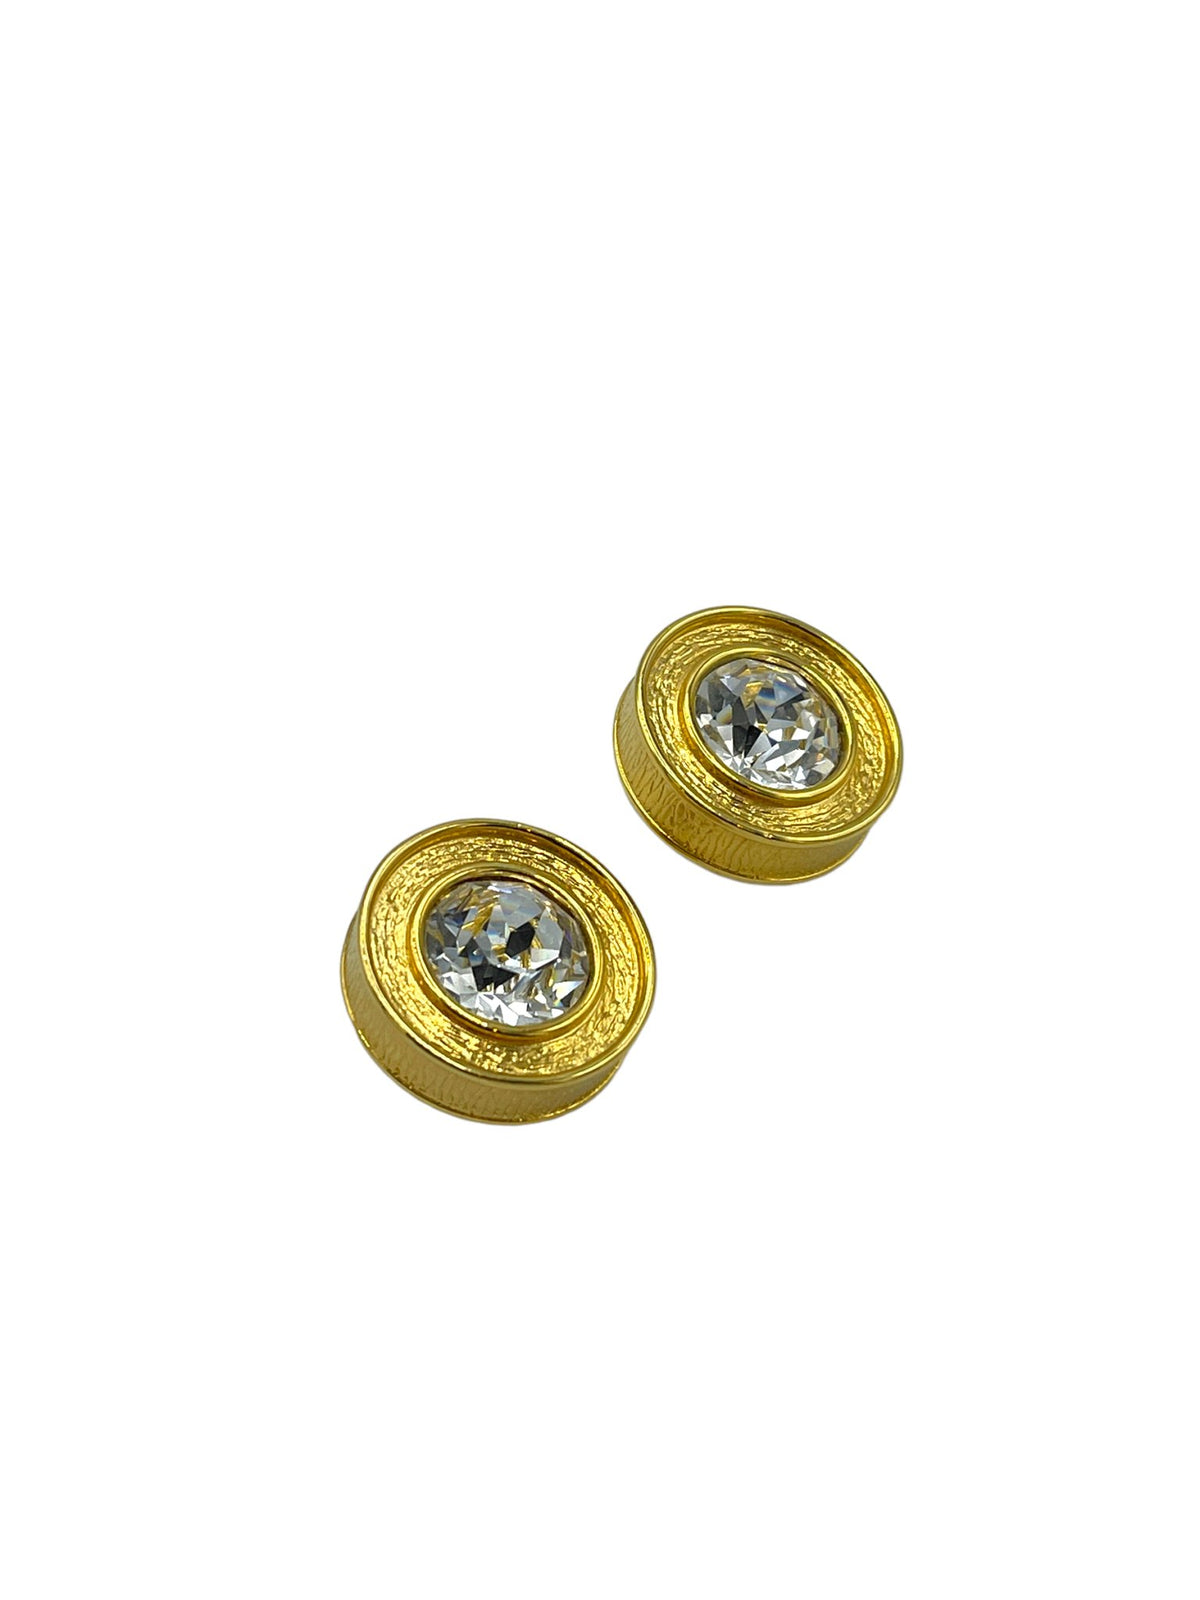 Kenneth Jay Lane KJL Gold Round Large Clear Crystal Rhinestone Vintage Clip-On Earrings - 24 Wishes Vintage Jewelry